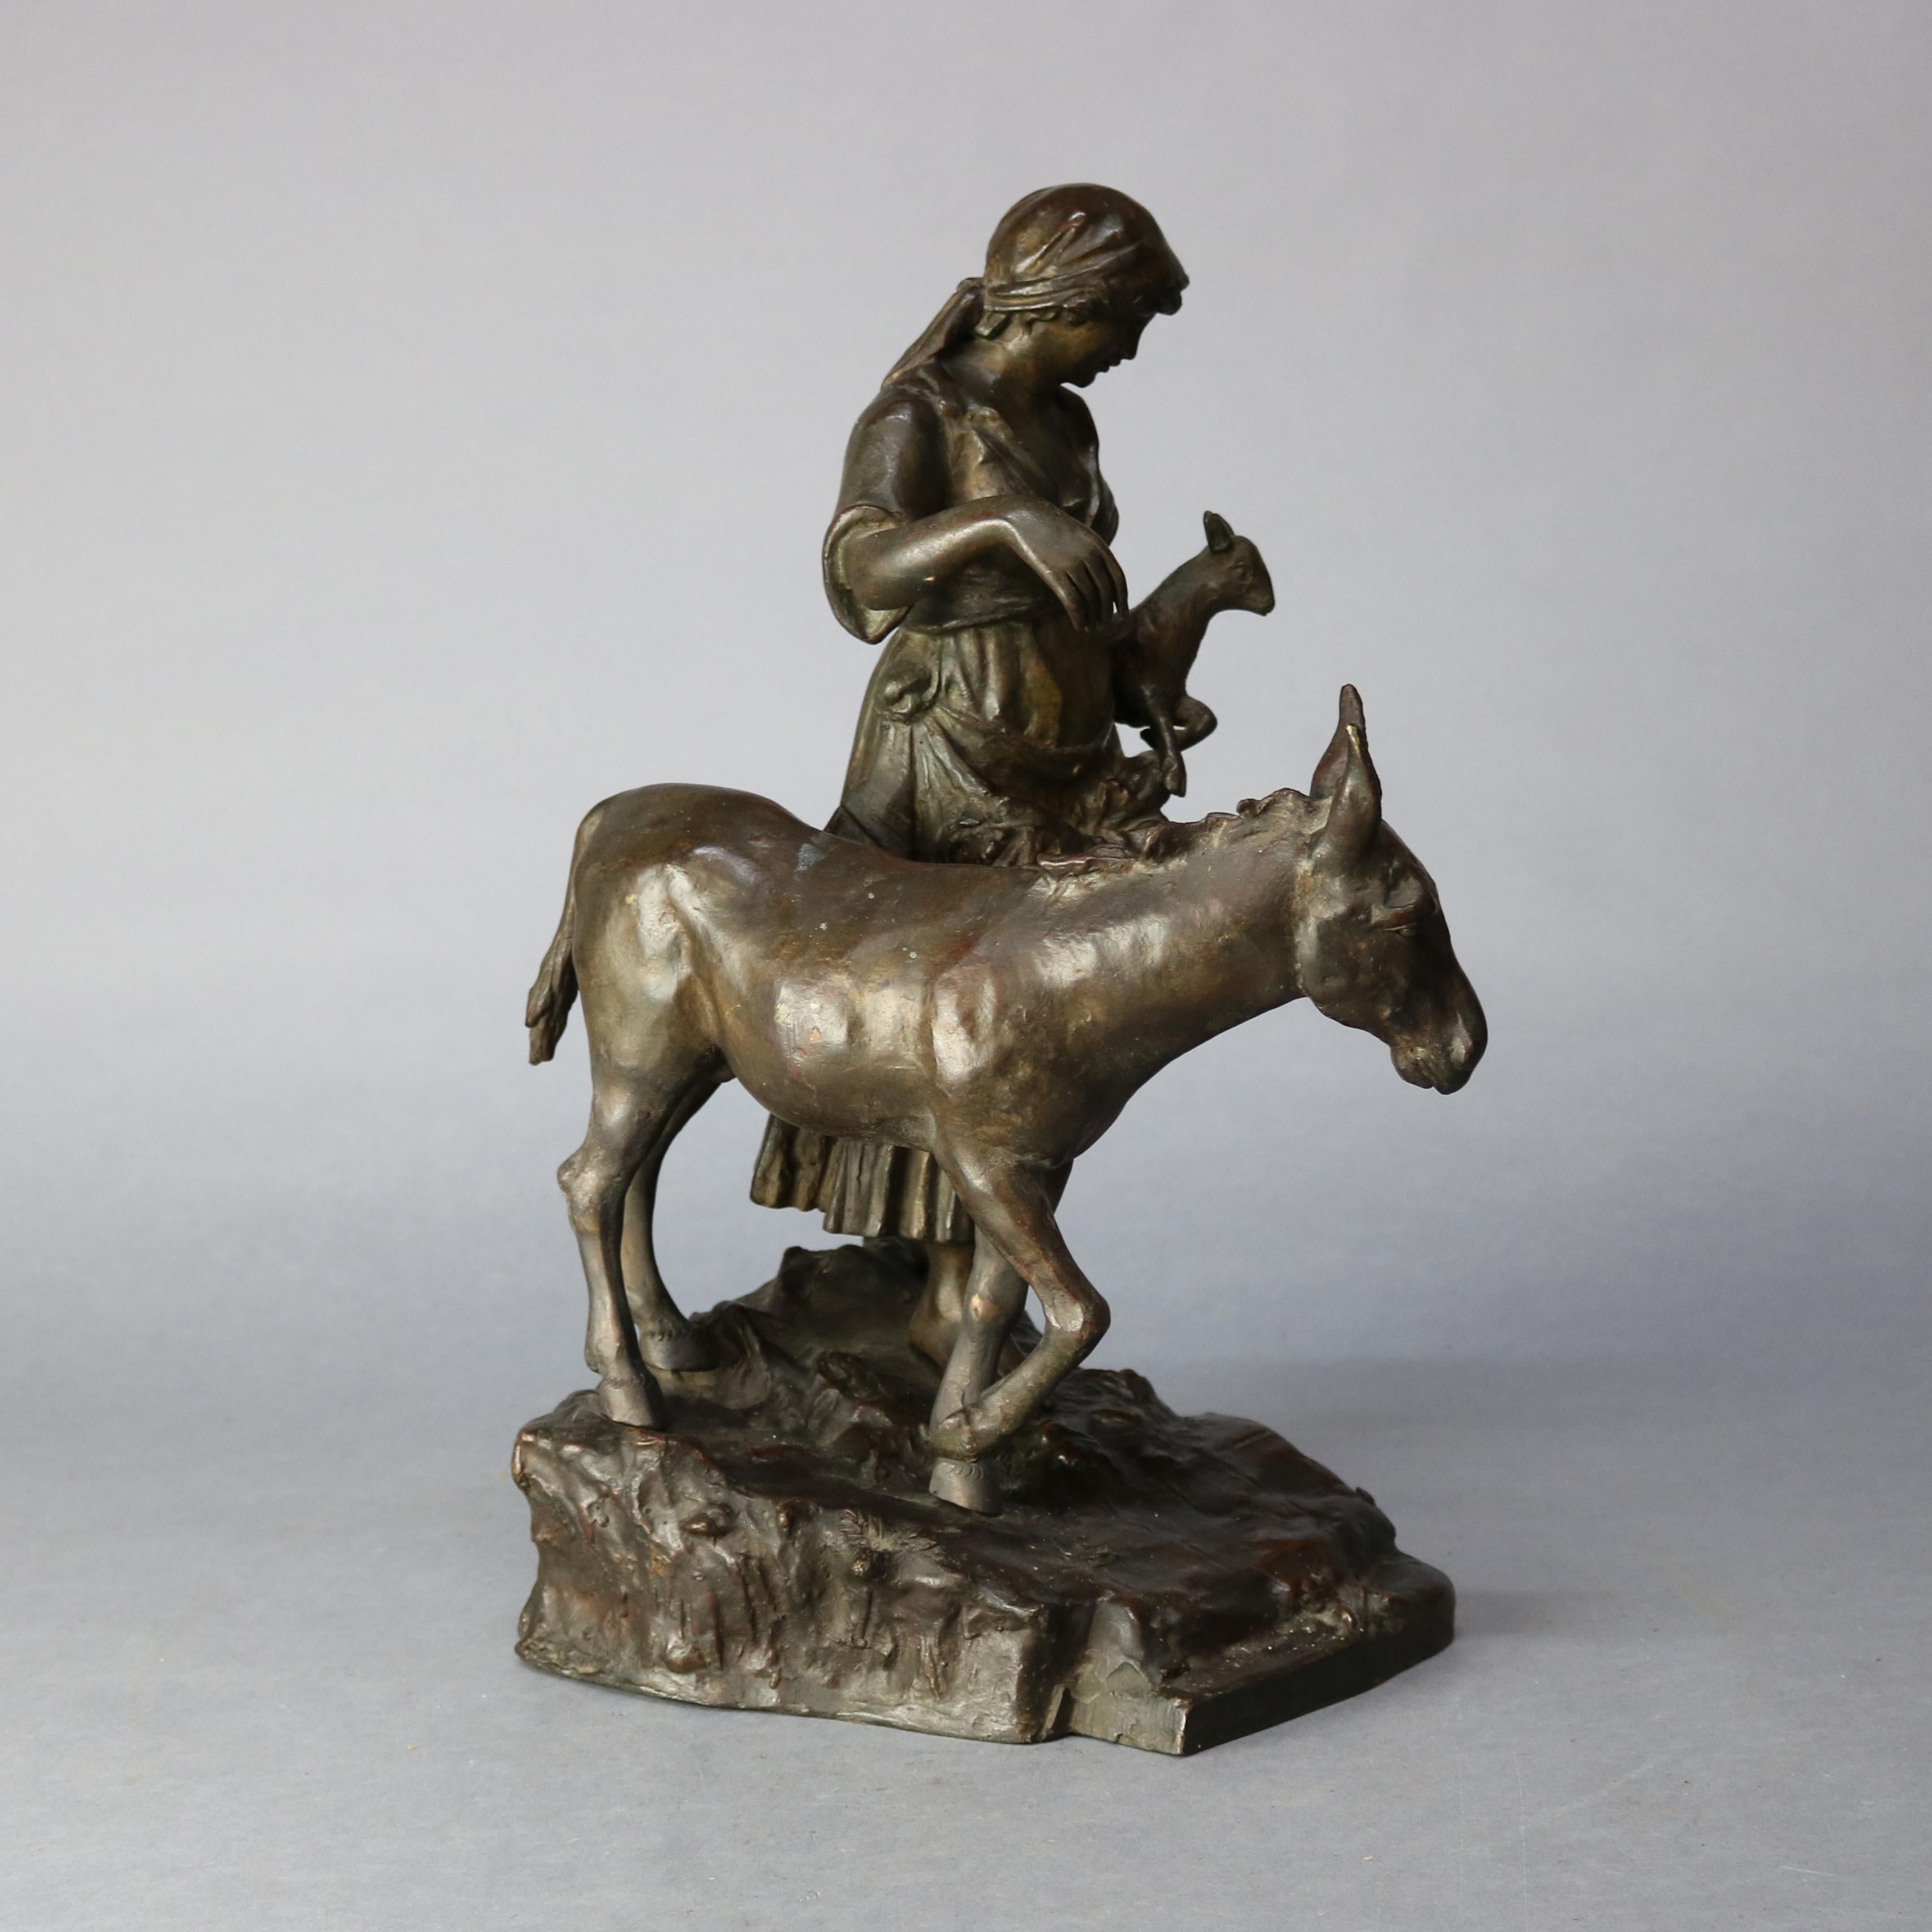 Cast Antique Bronze Sculpture Grouping of Girl with Lamb and Donkey, 19th Century